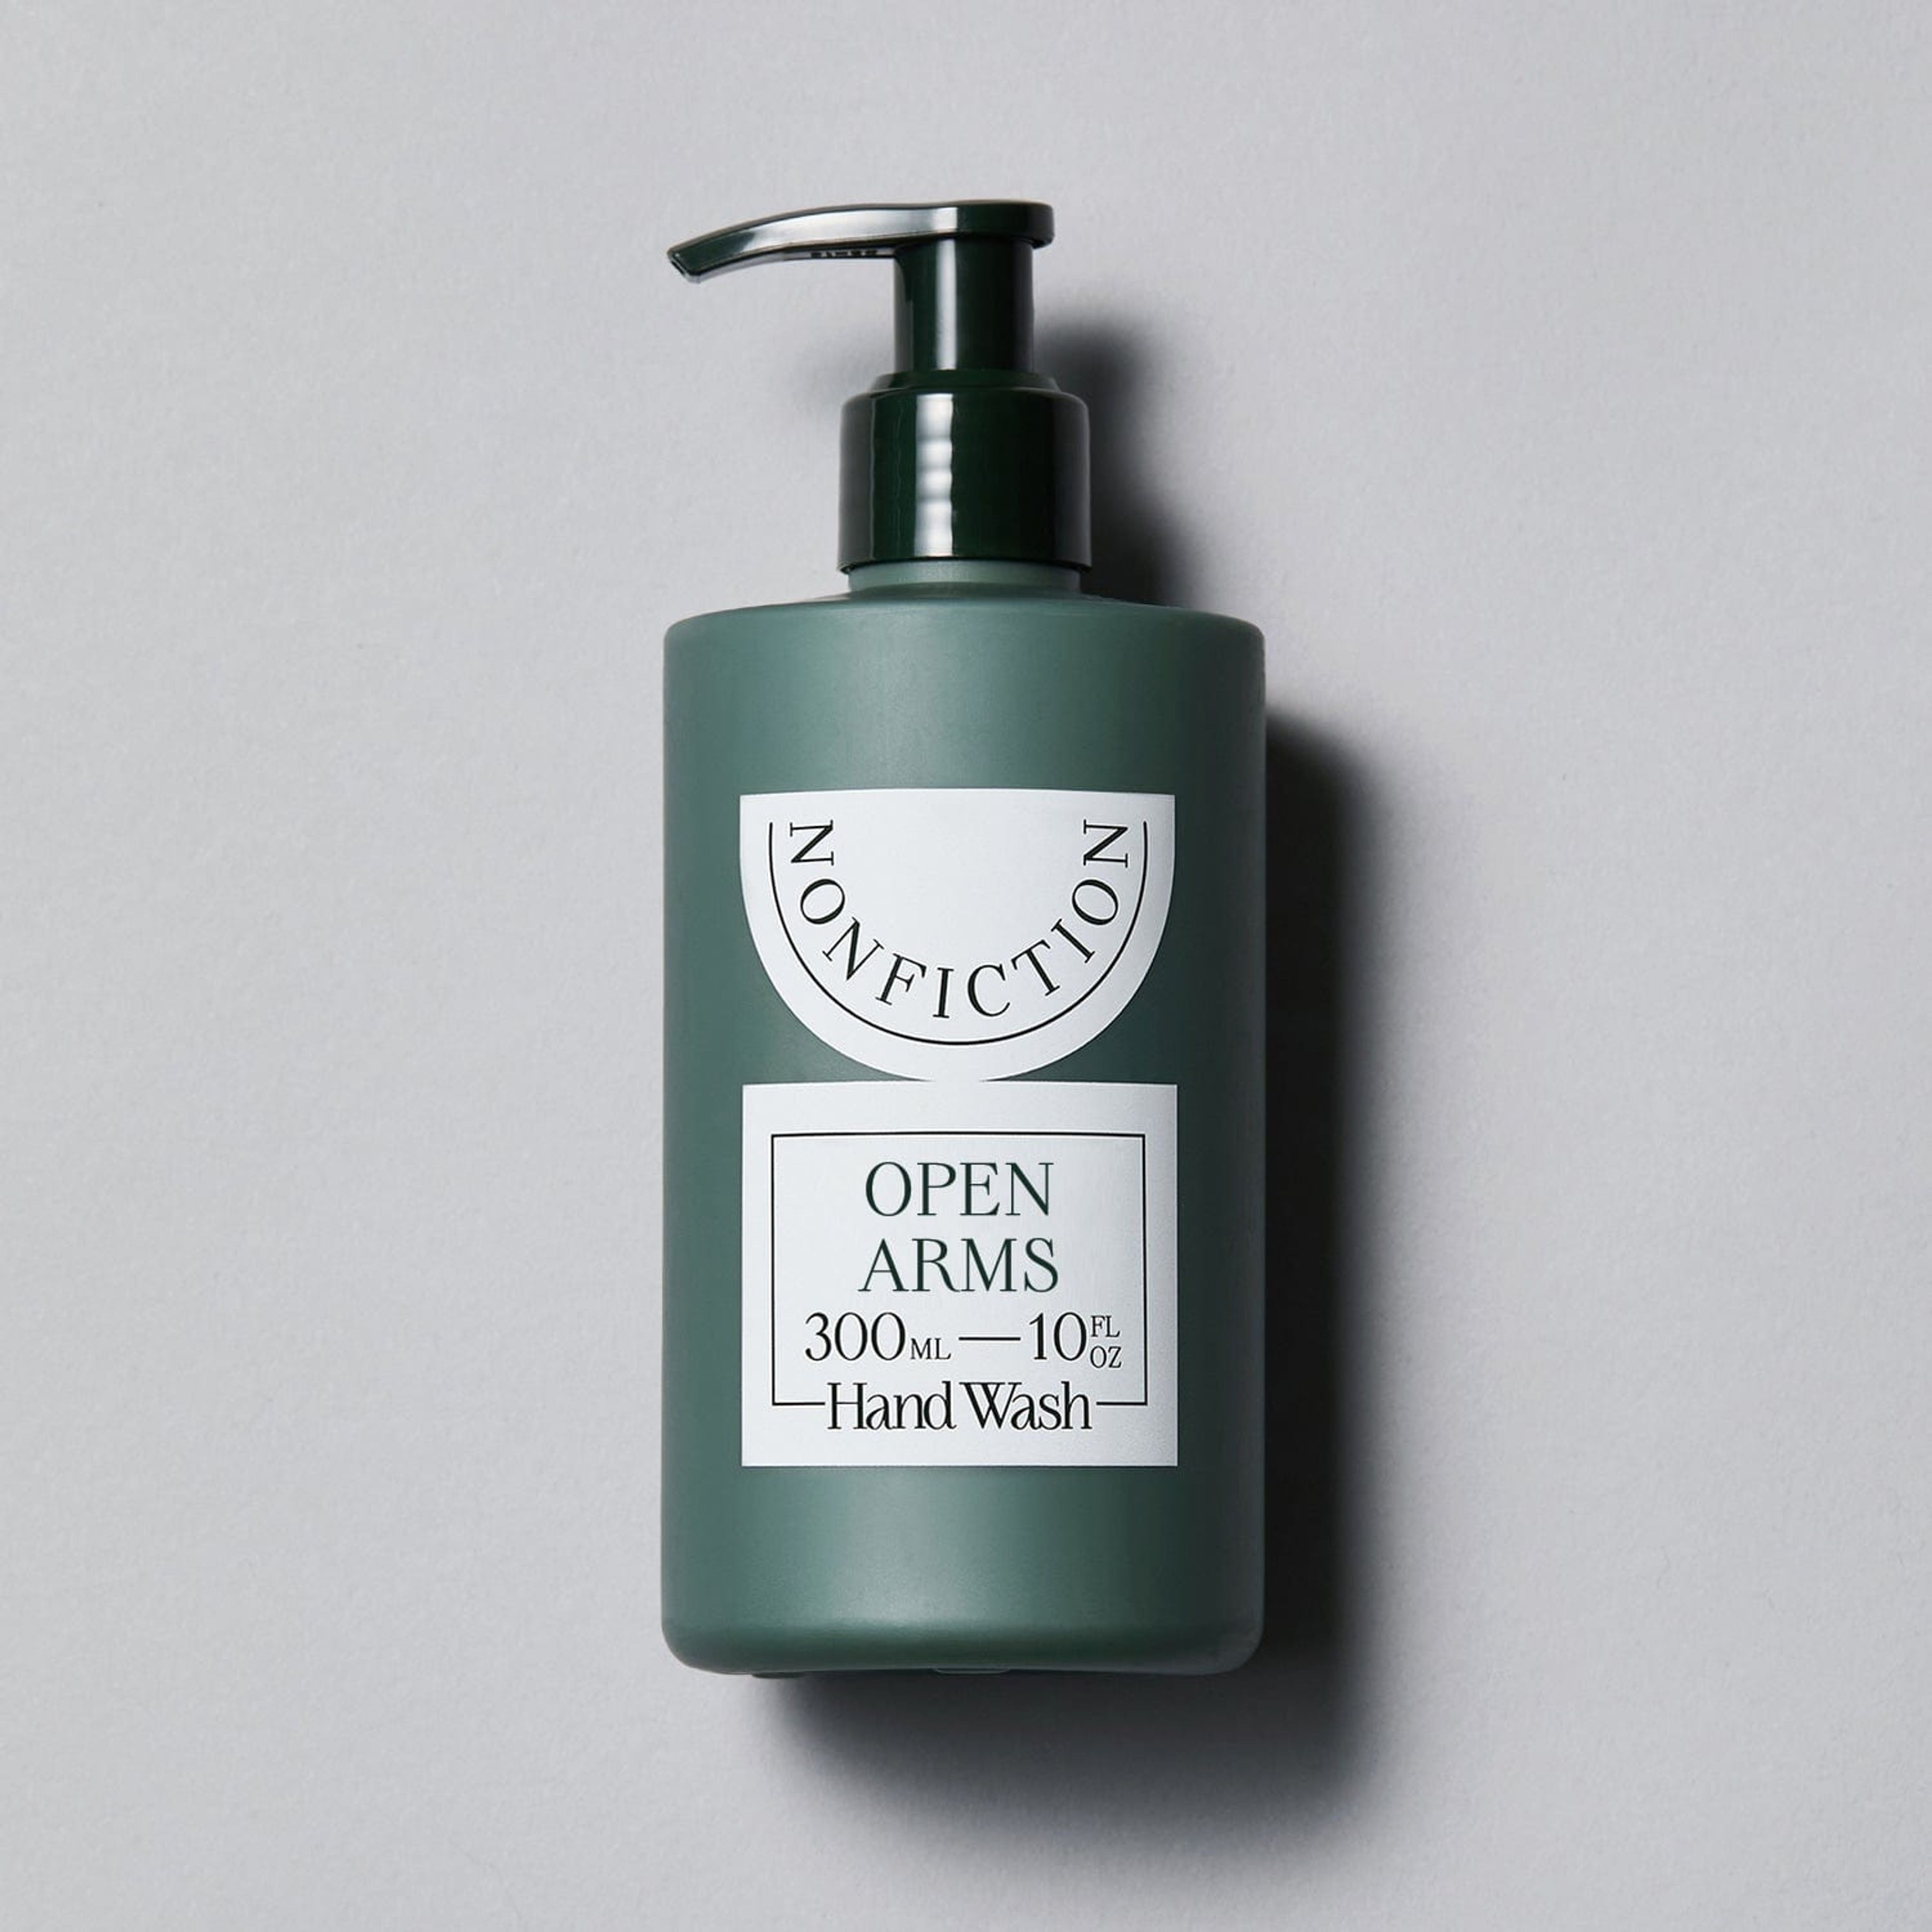 OPEN ARMS Hand Wash